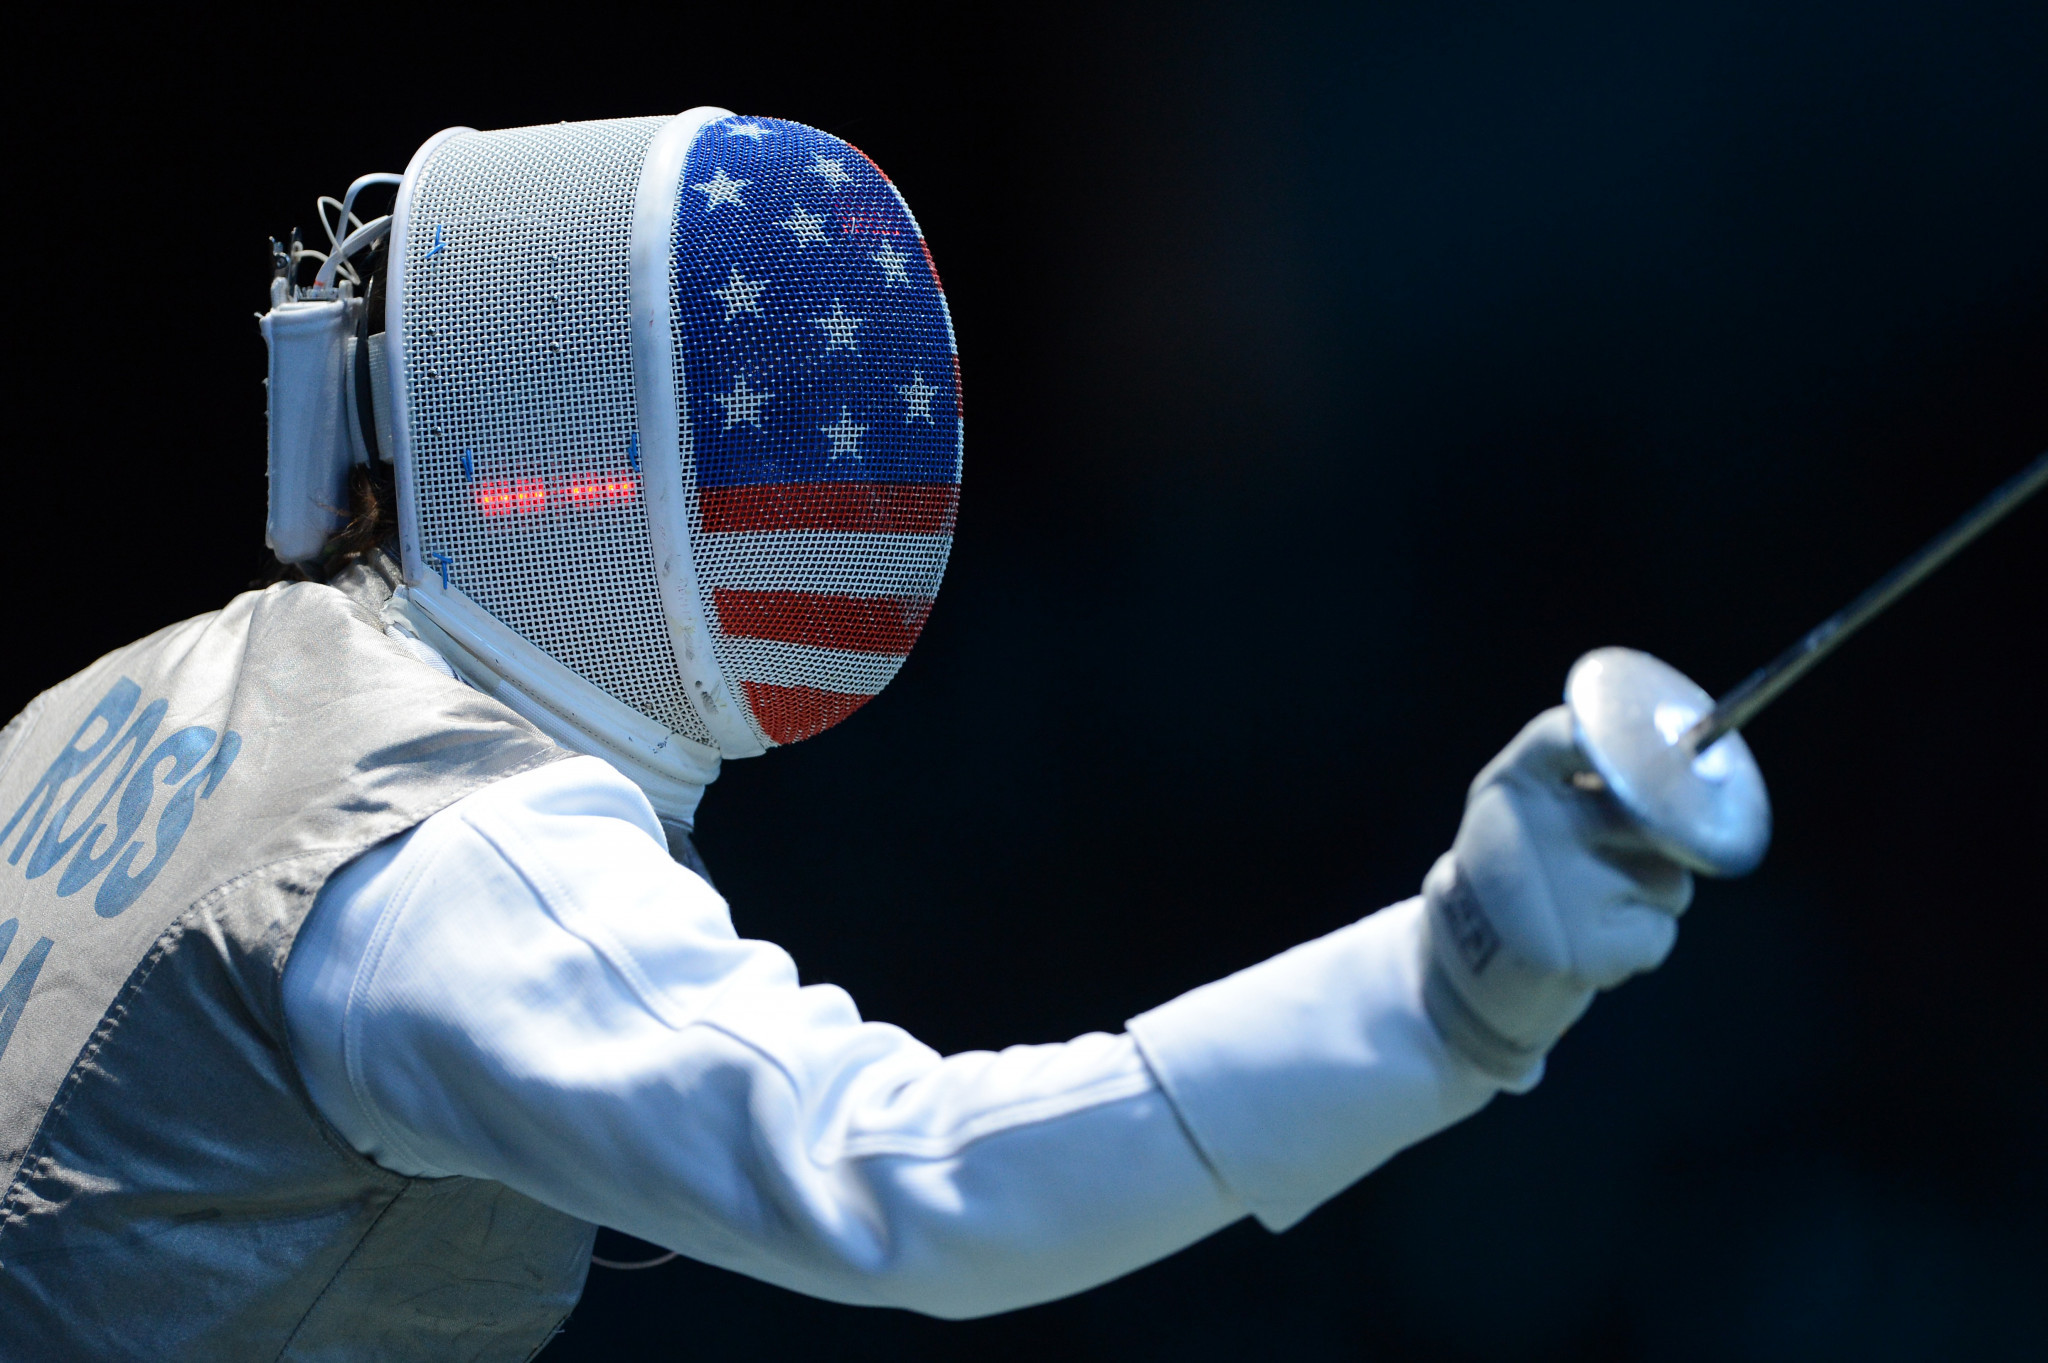 Nicole Ross held off a strong home challenge to claim the women's foil title ©Getty Images